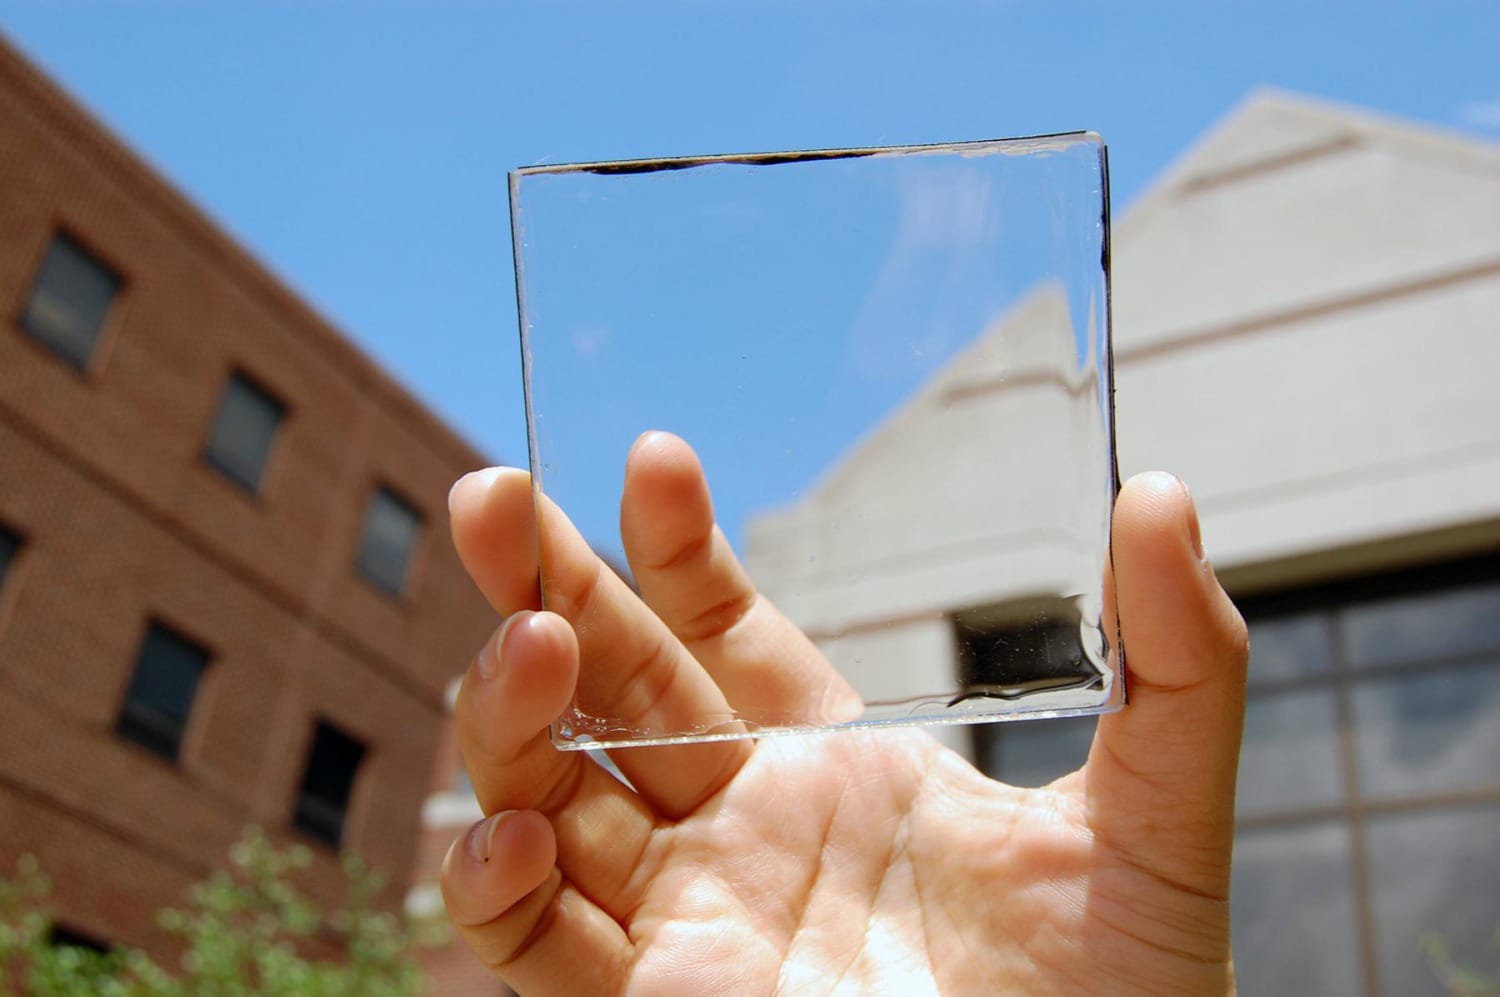 Transparent Solar Panels Will Turn Windows Into Green Energy Collectors (source in comments)